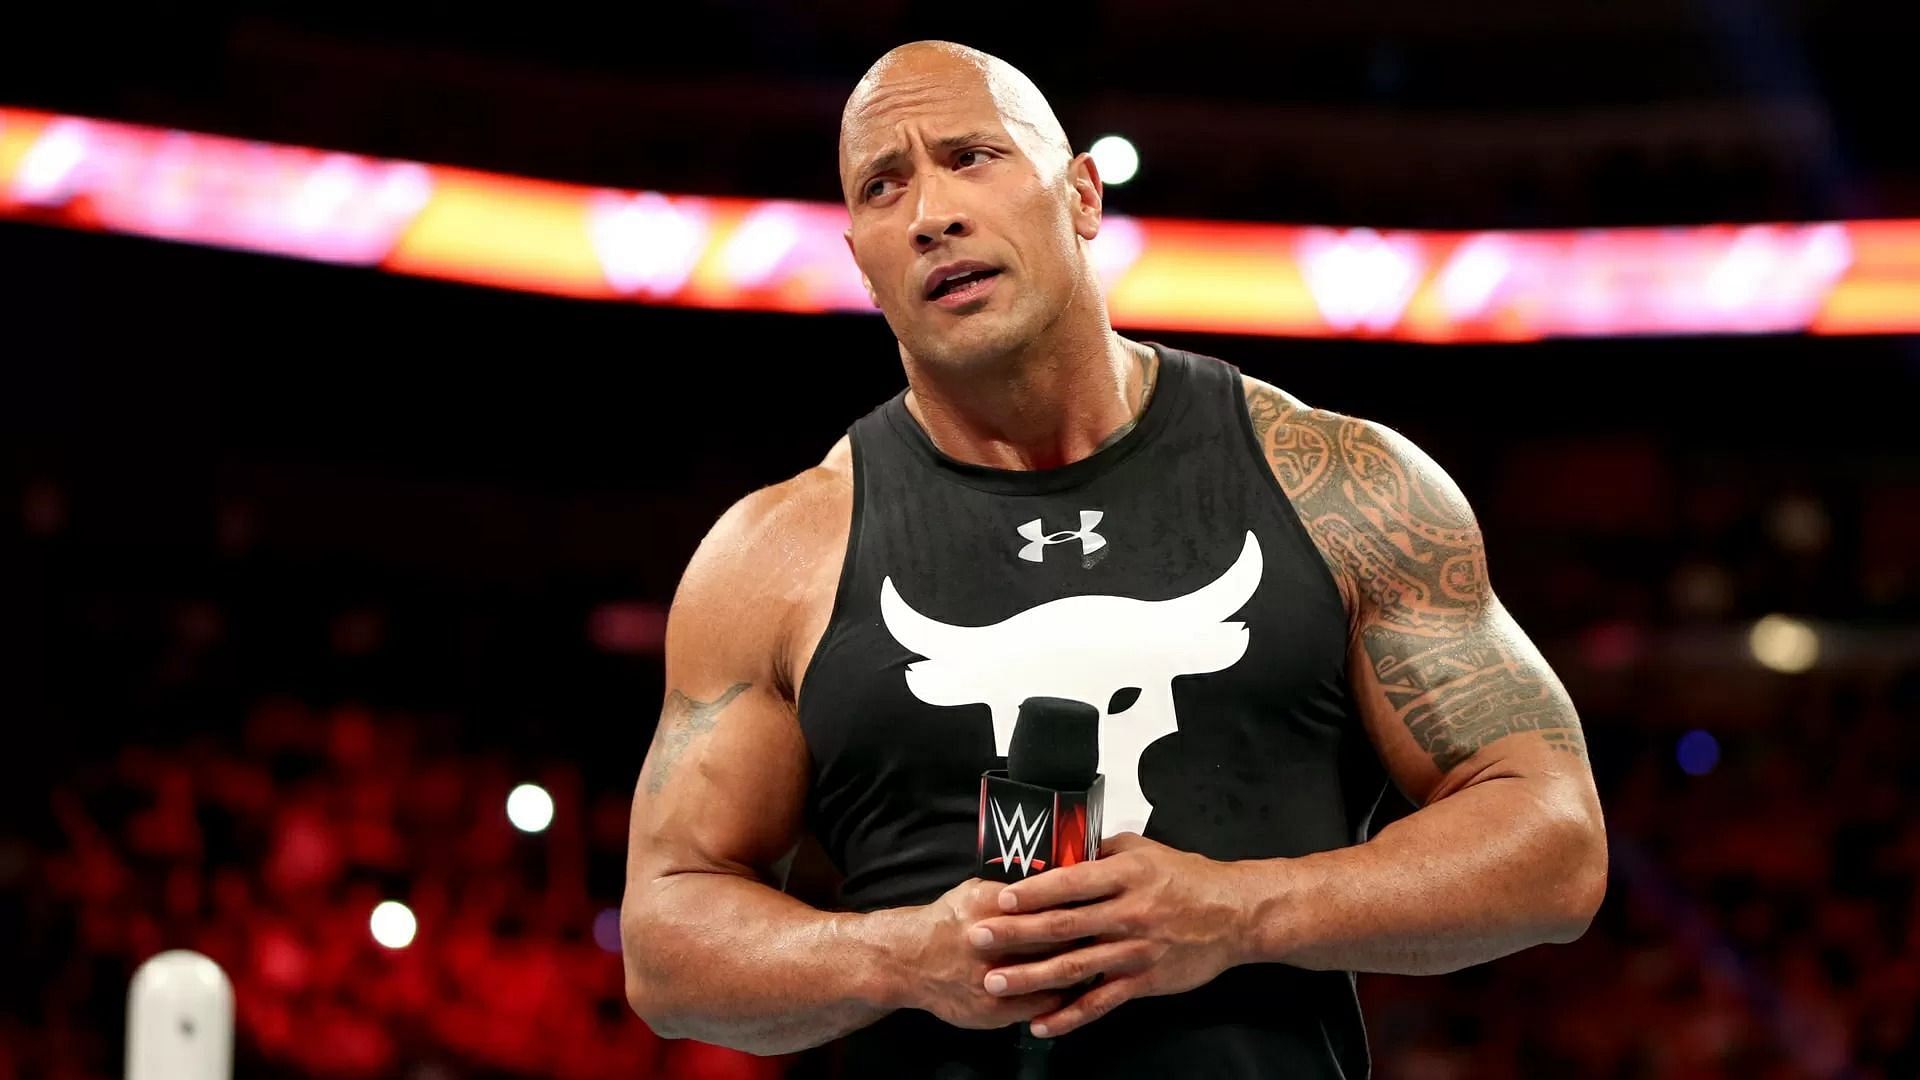 The Rock is one of the greatest of all time